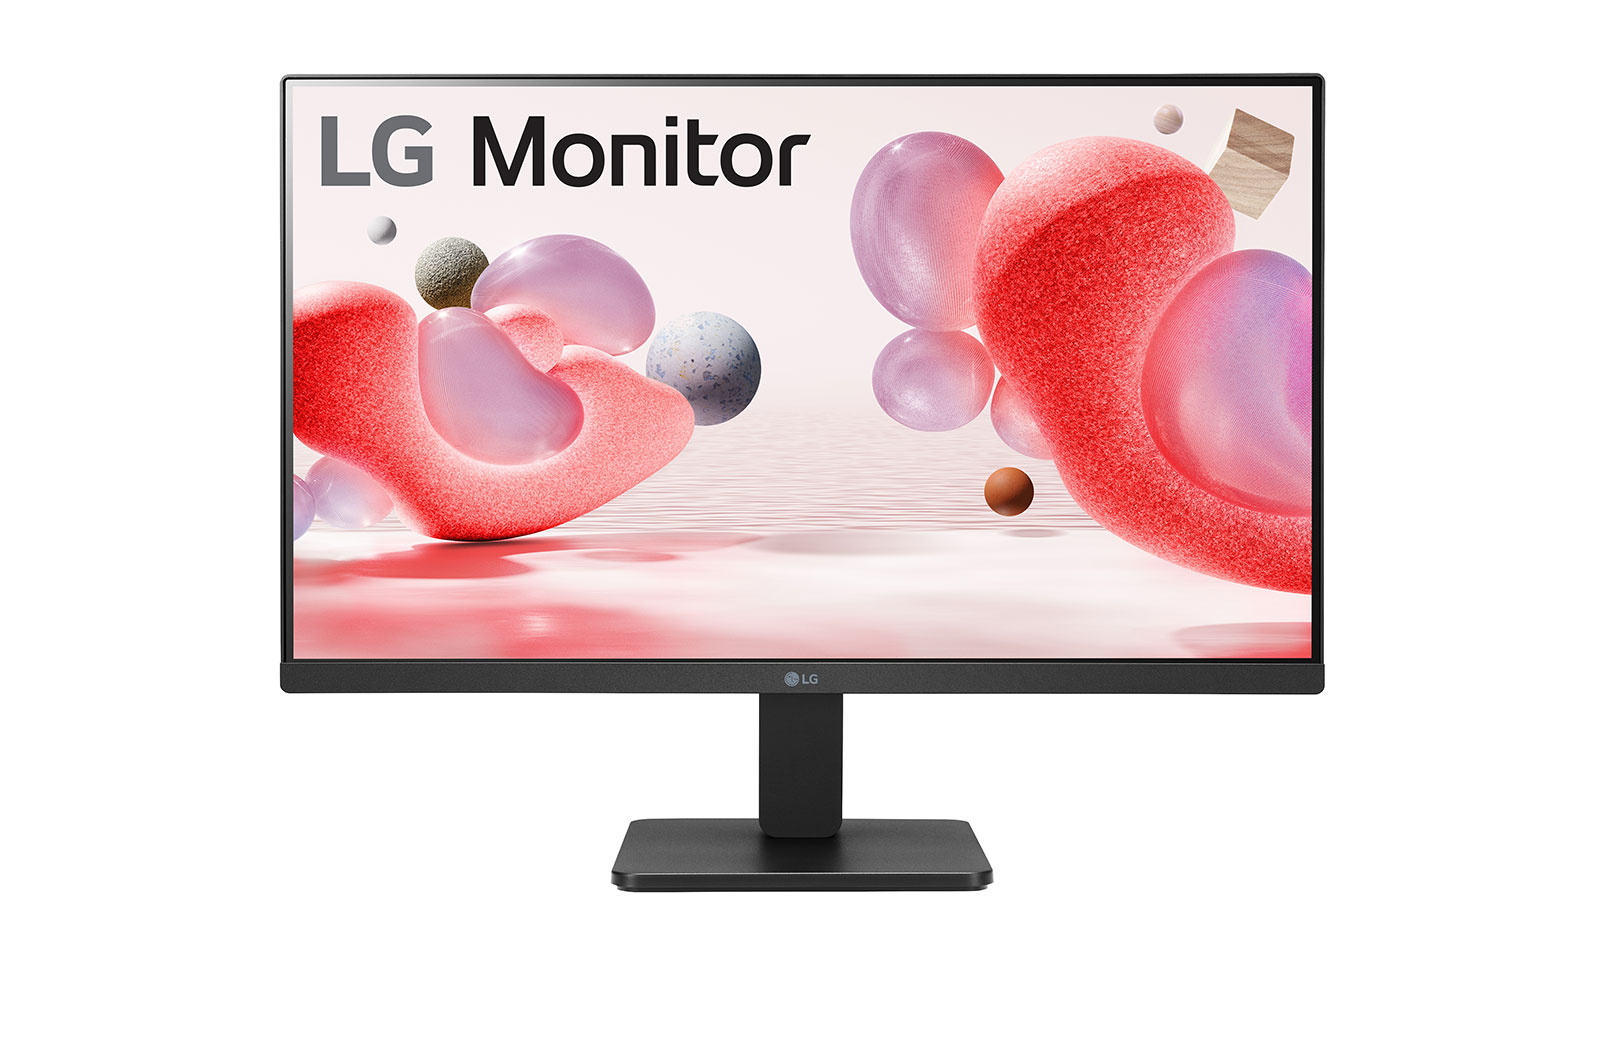 Lg Monitor 24Mr400 B Led 24 Panel Ips Resolucion 1920 X 1080 Fhd Frecuencia 100Hz Color Negro Conexion Vga Hdmi  Amd Freesync Dynamic Action Sync Smart Energy Saving Auto Input Switch Flicker Safe Super Resolution Black Stabilizer Onscreen Control  Osc  Color Weakness Mode Reader Mode - 24MR400-B